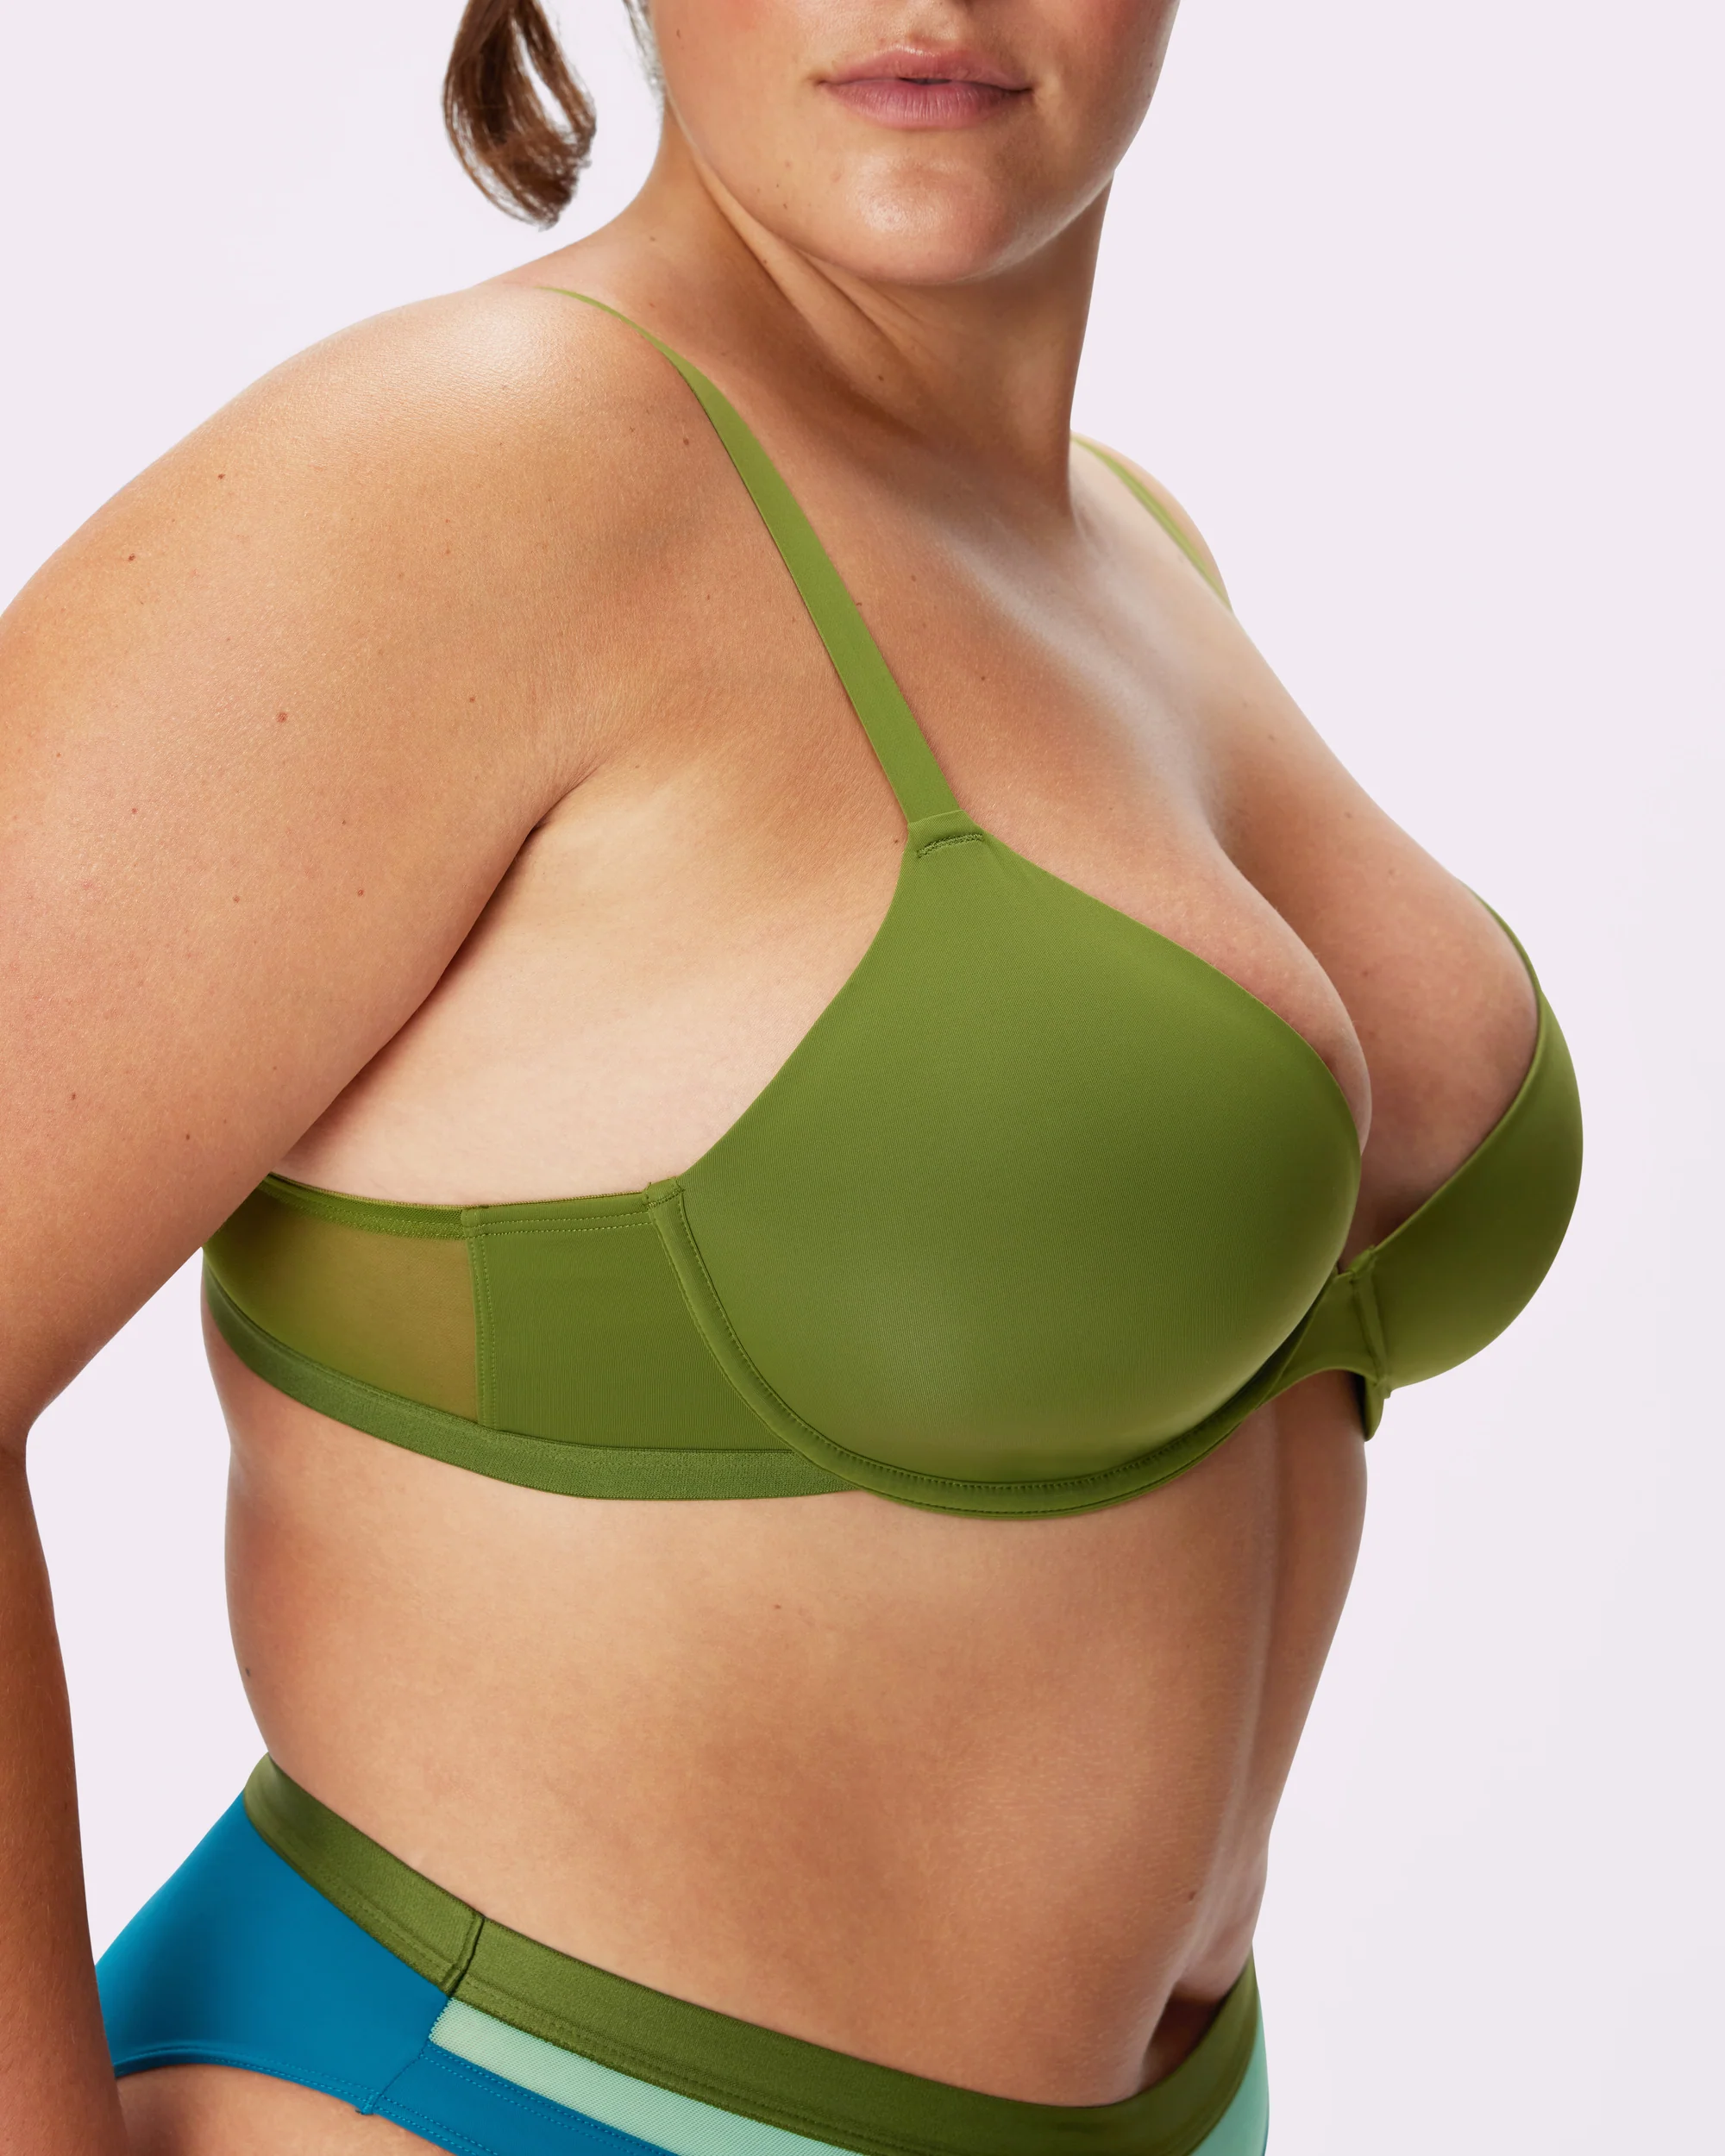 Which Bras Actually Look Seamless Under a T-Shirt?